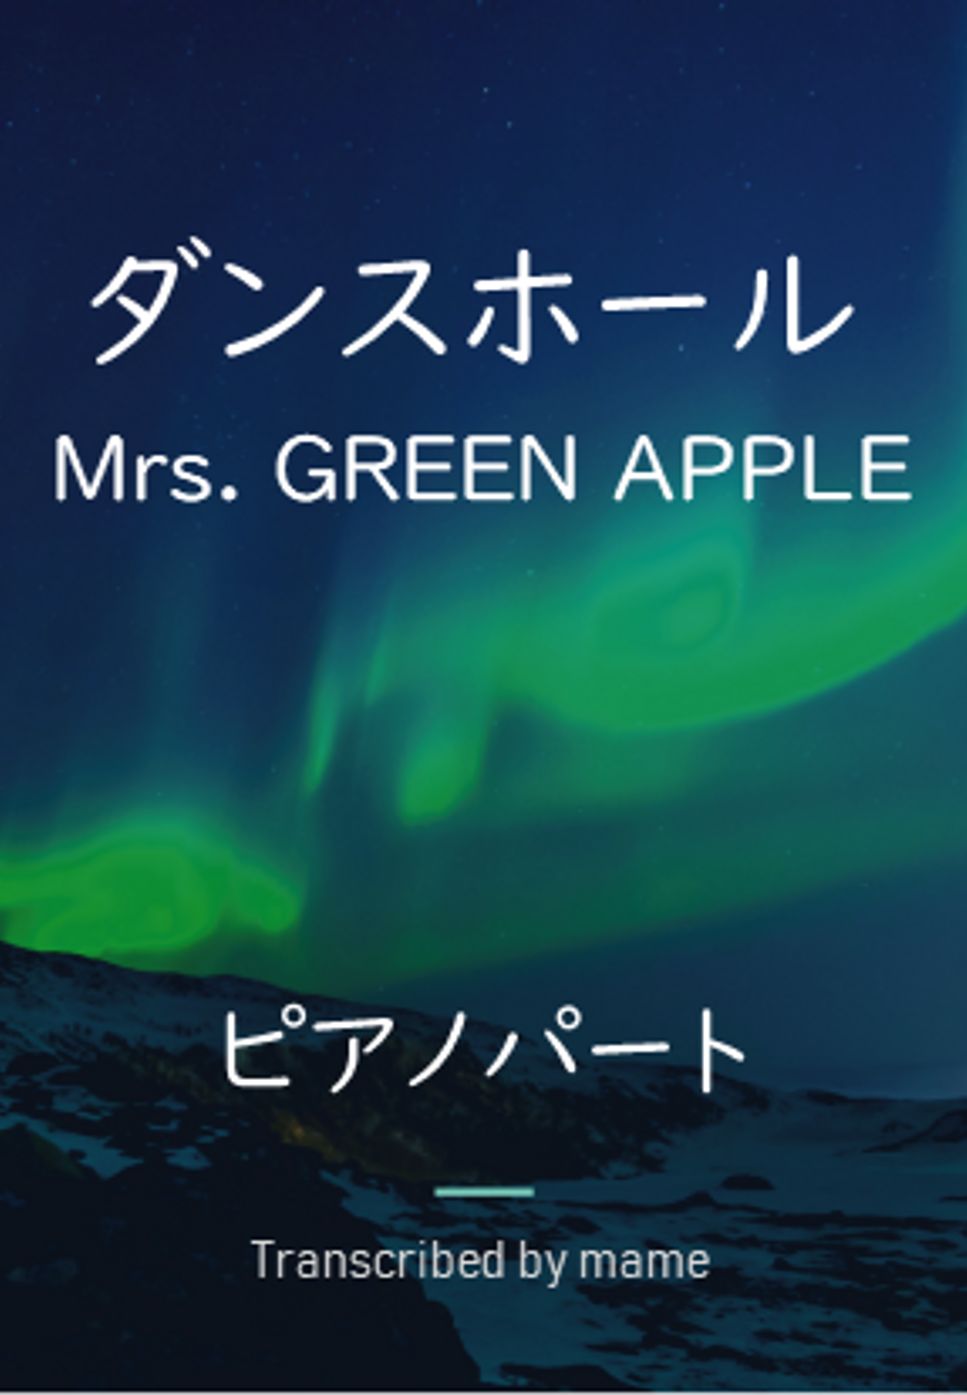 Mrs. GREEN APPLE - ダンスホール (piano part) by mame